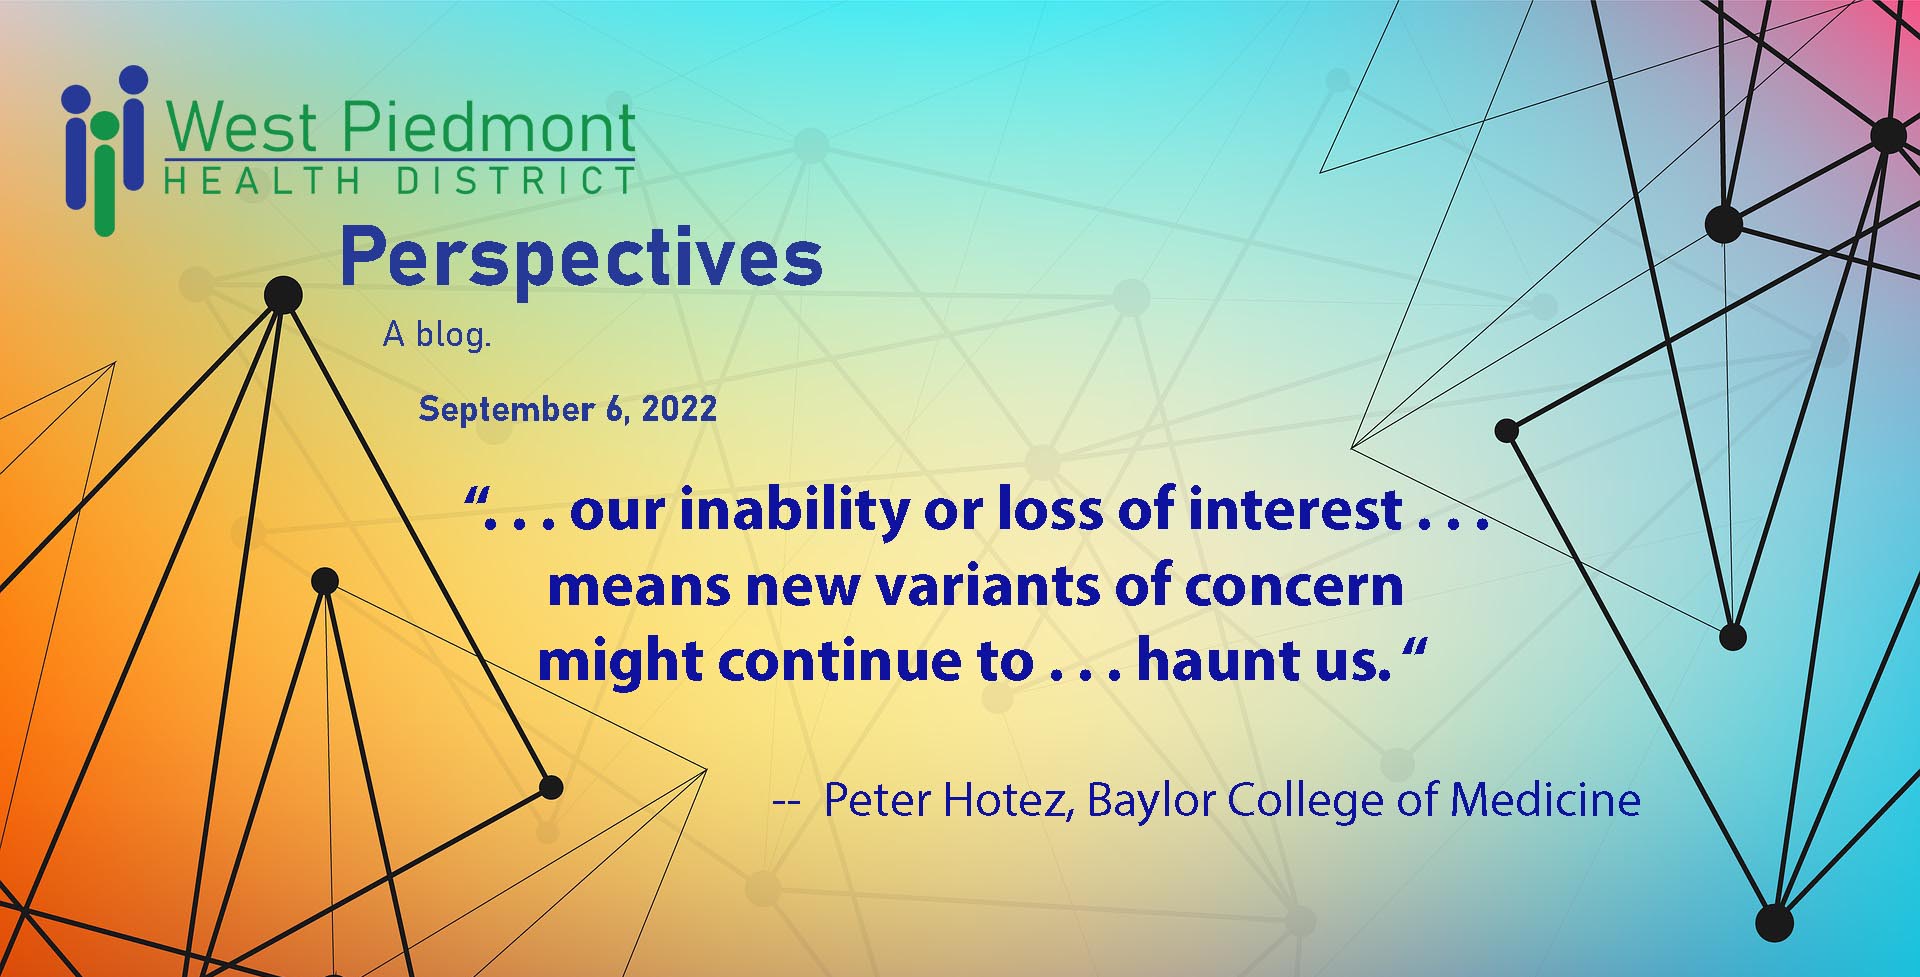 WP Perspectives blog cover and quote: our inability or loss of interest . . . means new variants of concern might continue to . . . haunt us -- Peter Hotez, Baylor College of Medicine